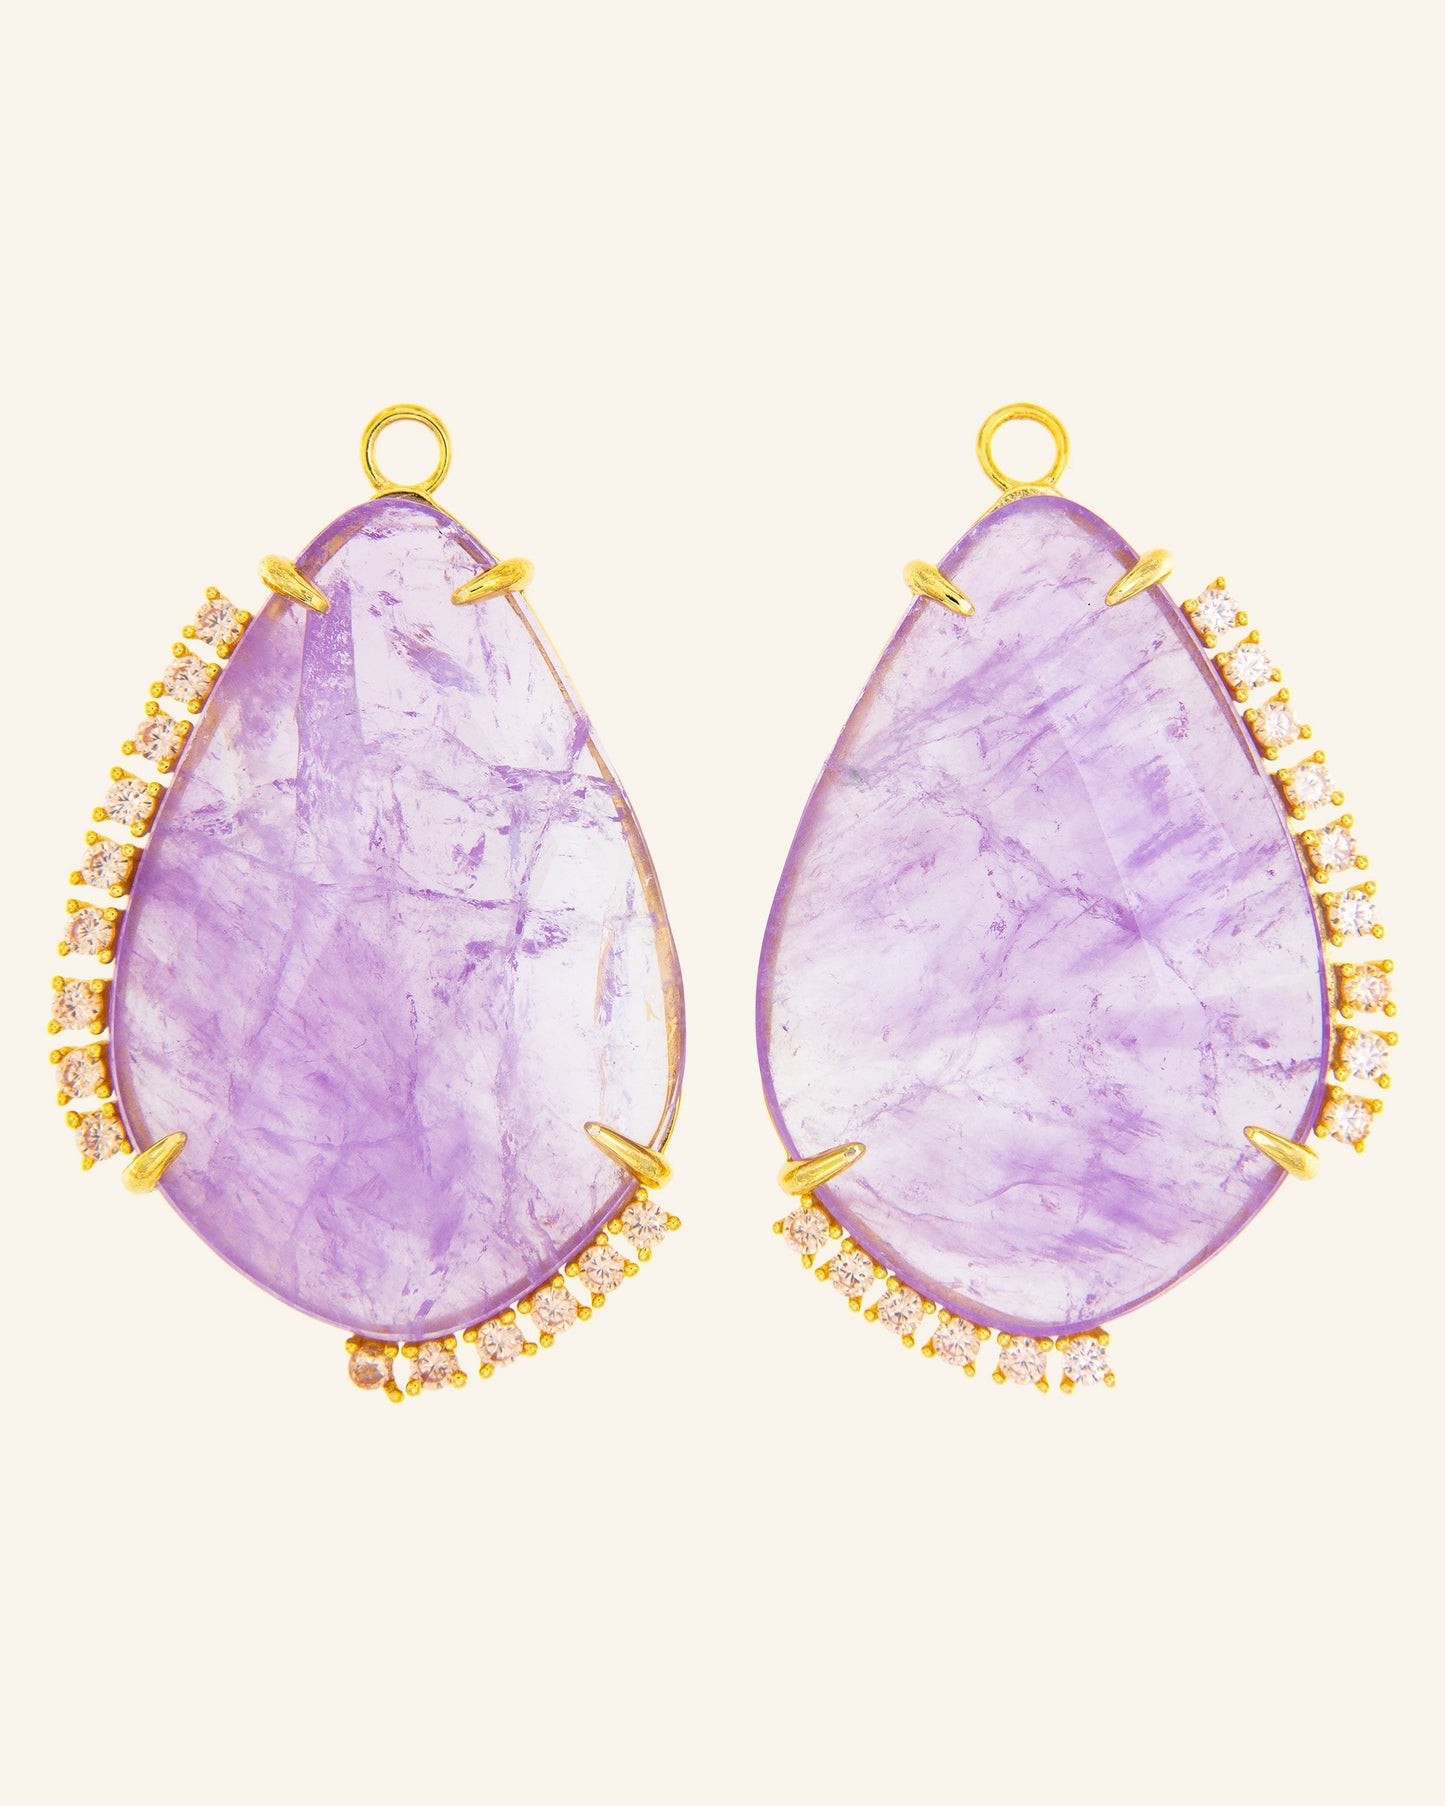 Pangea tears with amethyst and zircons